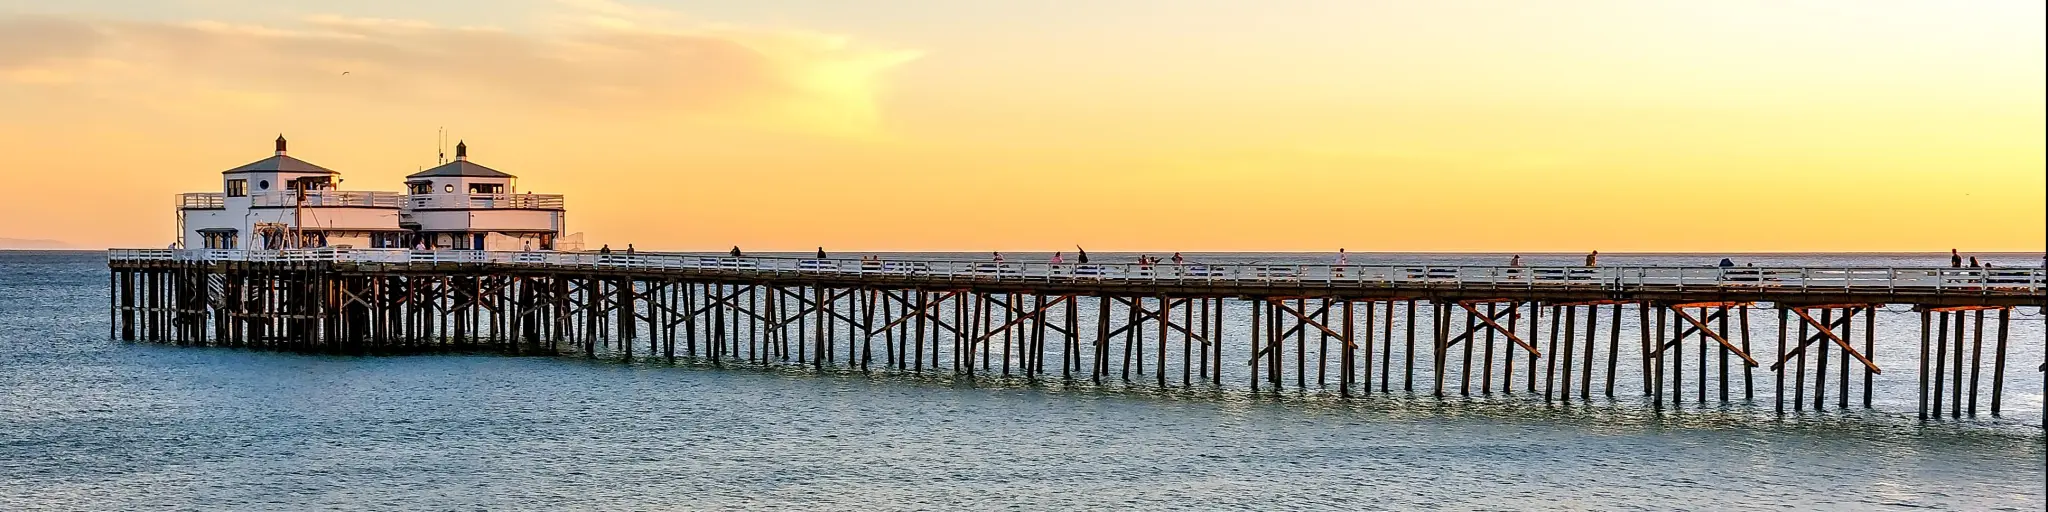 Sunset at Malibu pier and beach in Southern California